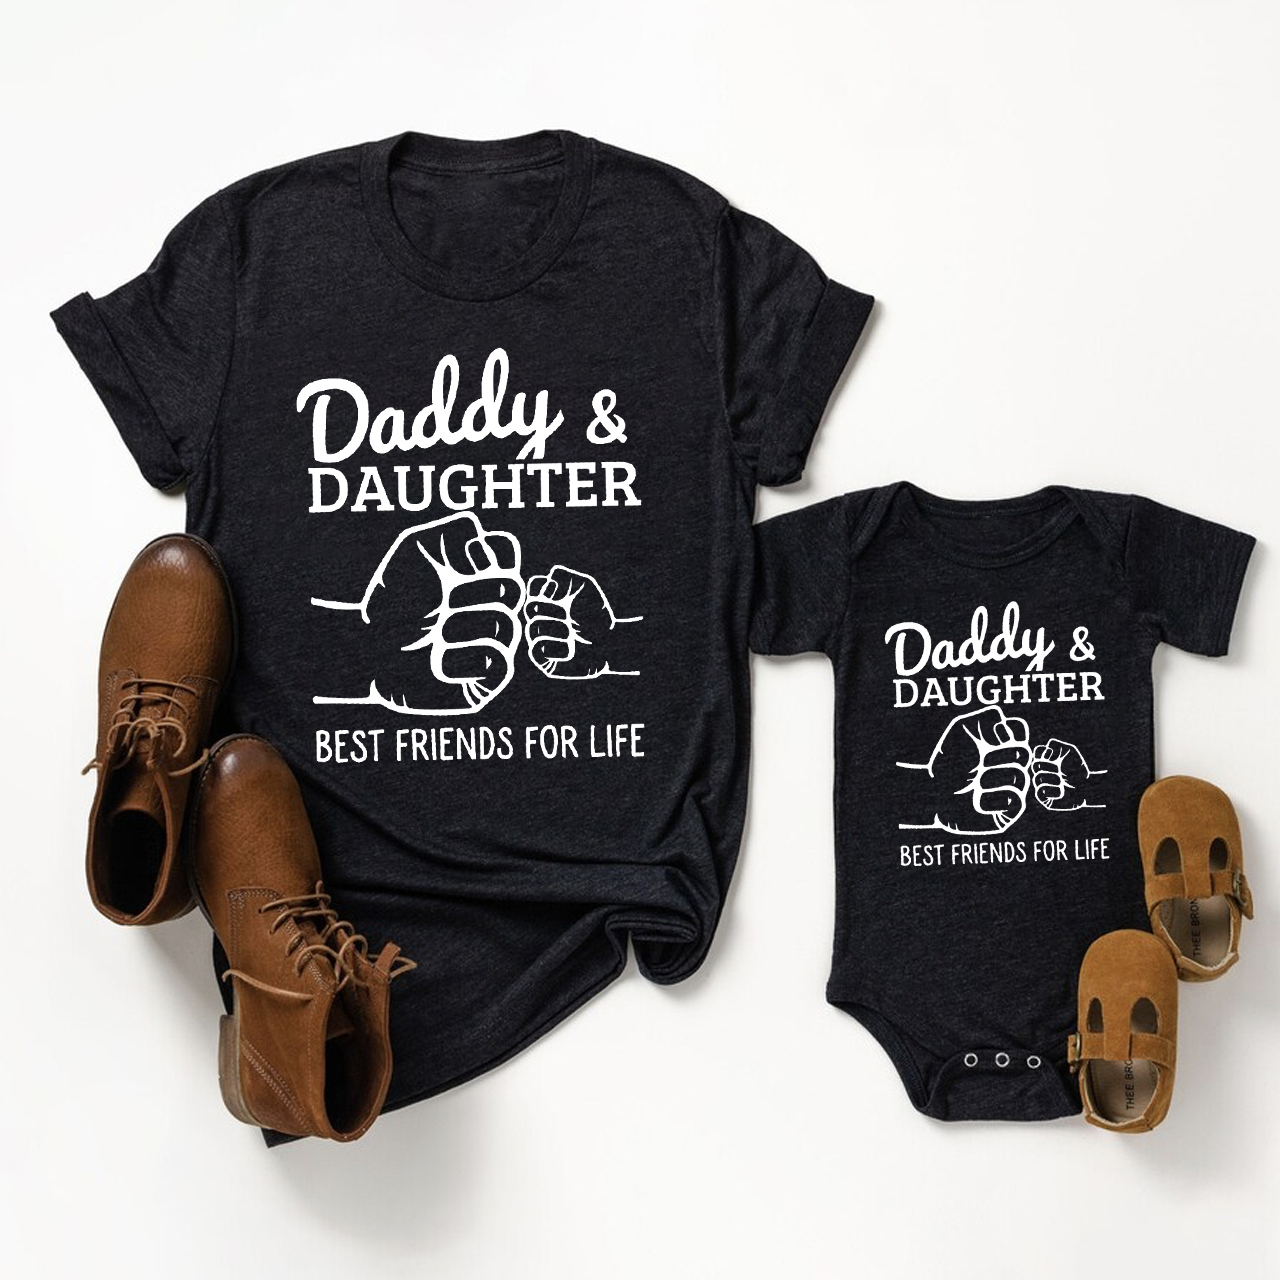 Daddy& DAUGHTER BEST FRIENDS FOR LIFE Matching Tees For Dad & Me